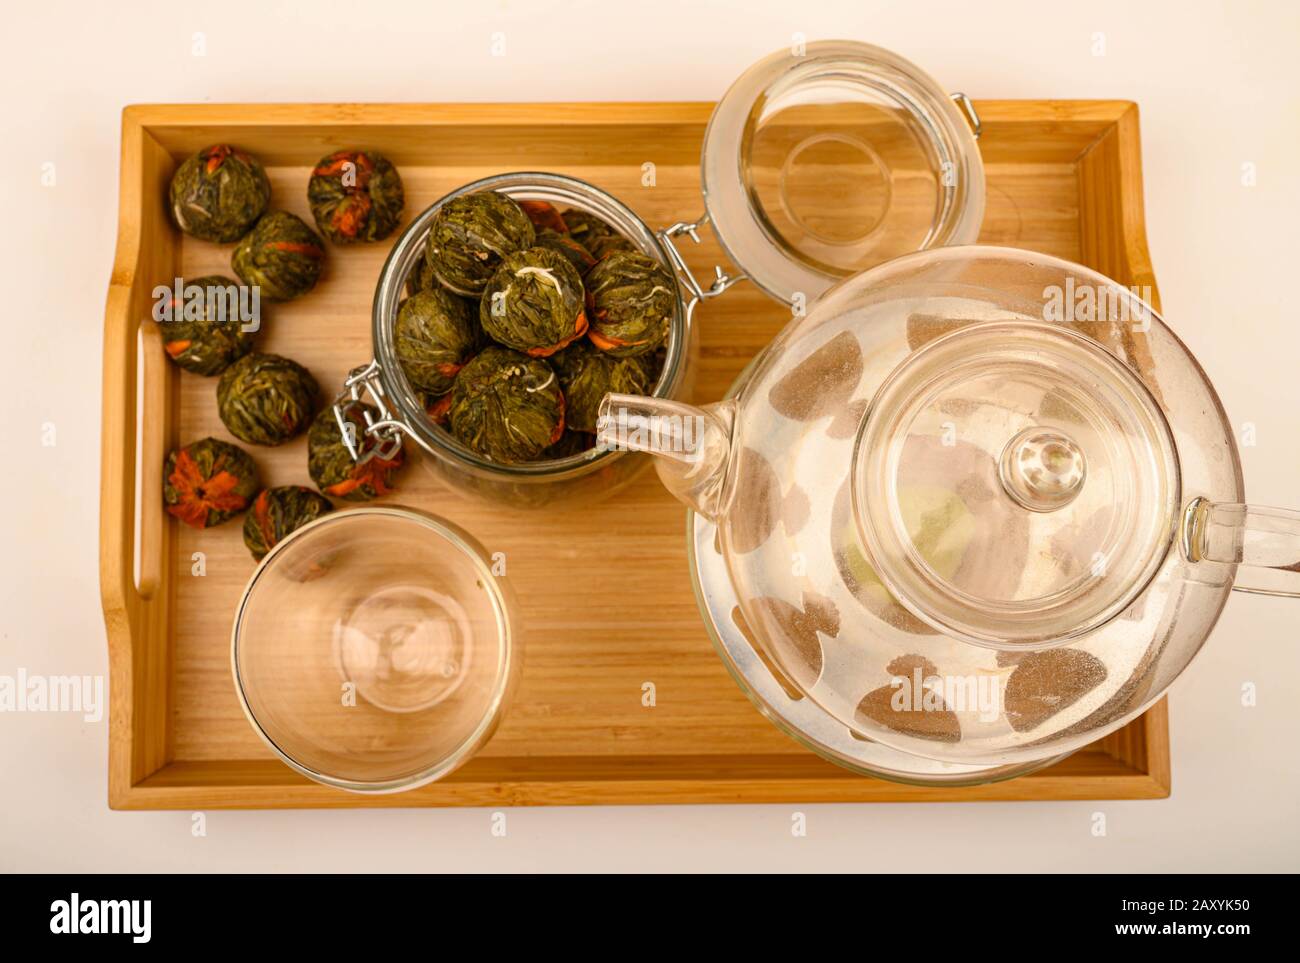 Flower tea balls in a glass jar, a glass teapot and a glass on a wooden tray on a white background. Close up Stock Photo